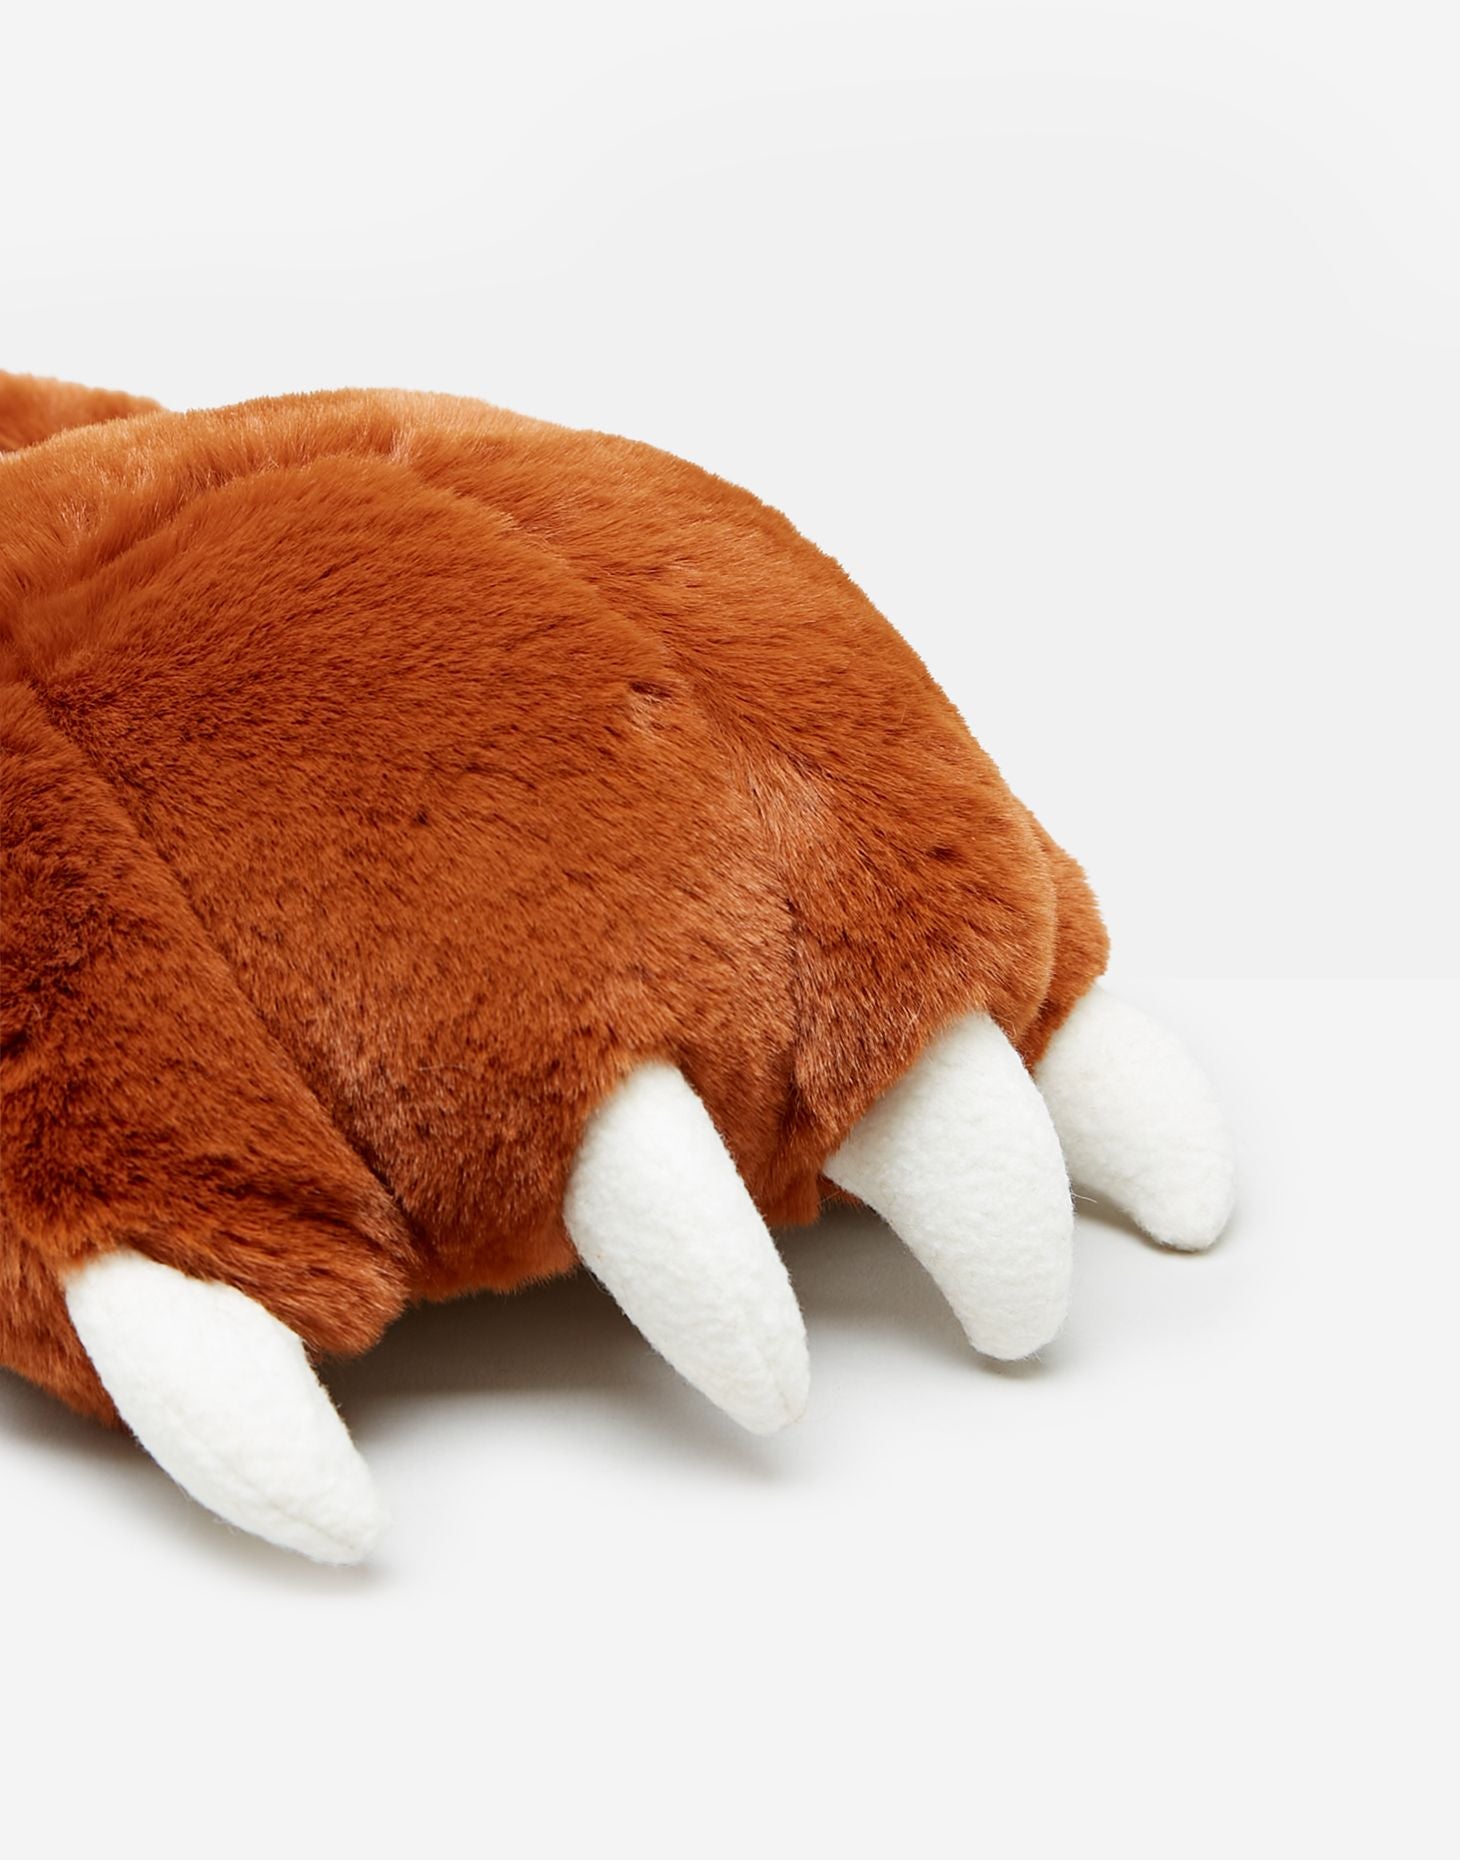 Clawtastic Monster Claw Slippers